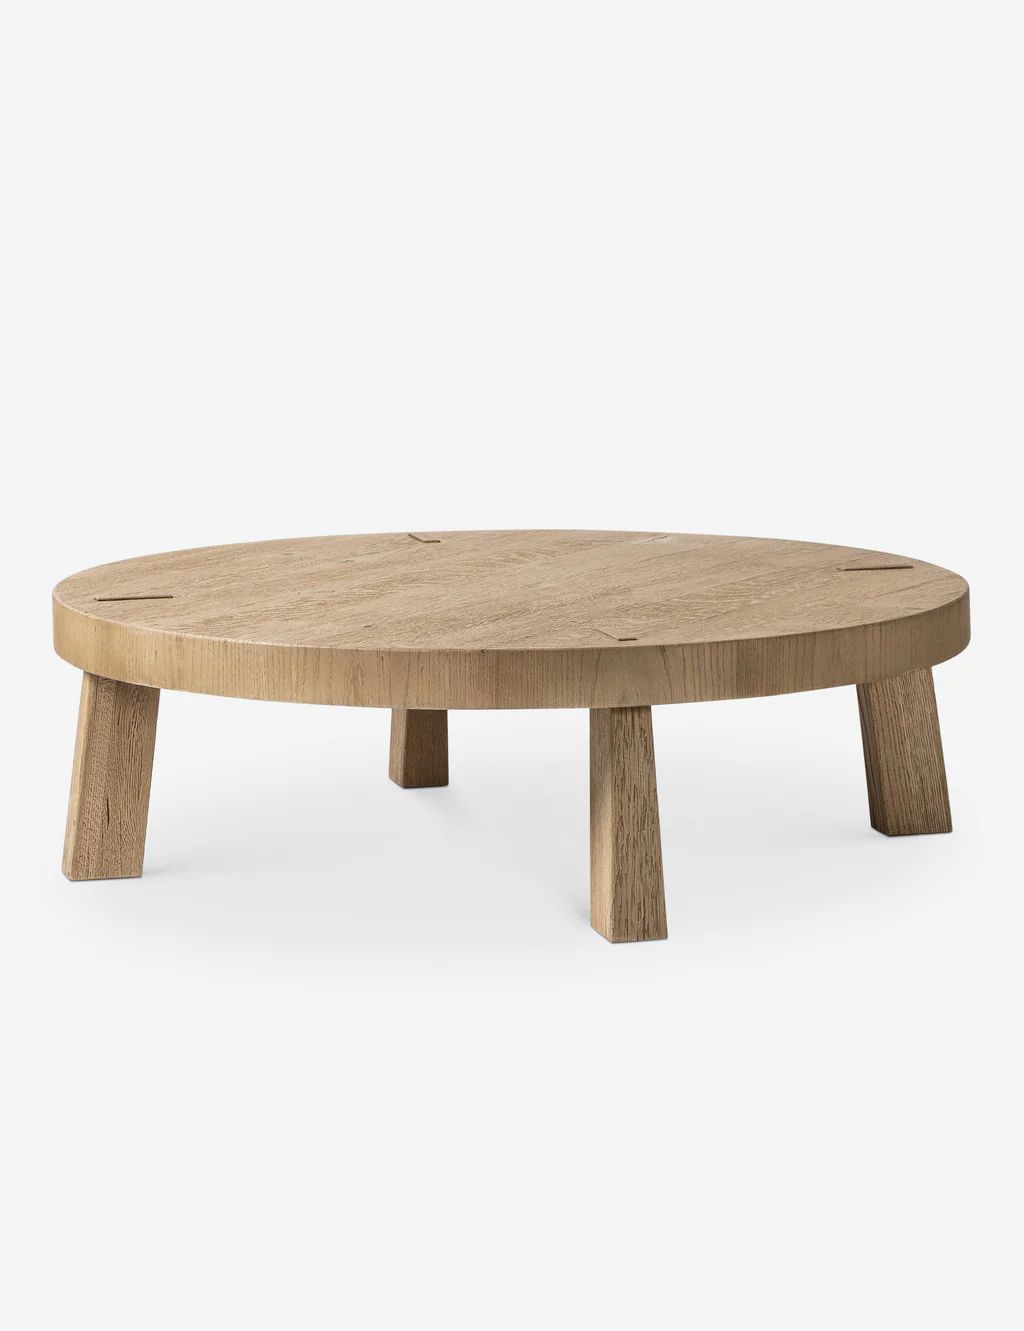 Sadira Round Coffee Table by Amber Lewis x Four Hands | Lulu and Georgia 